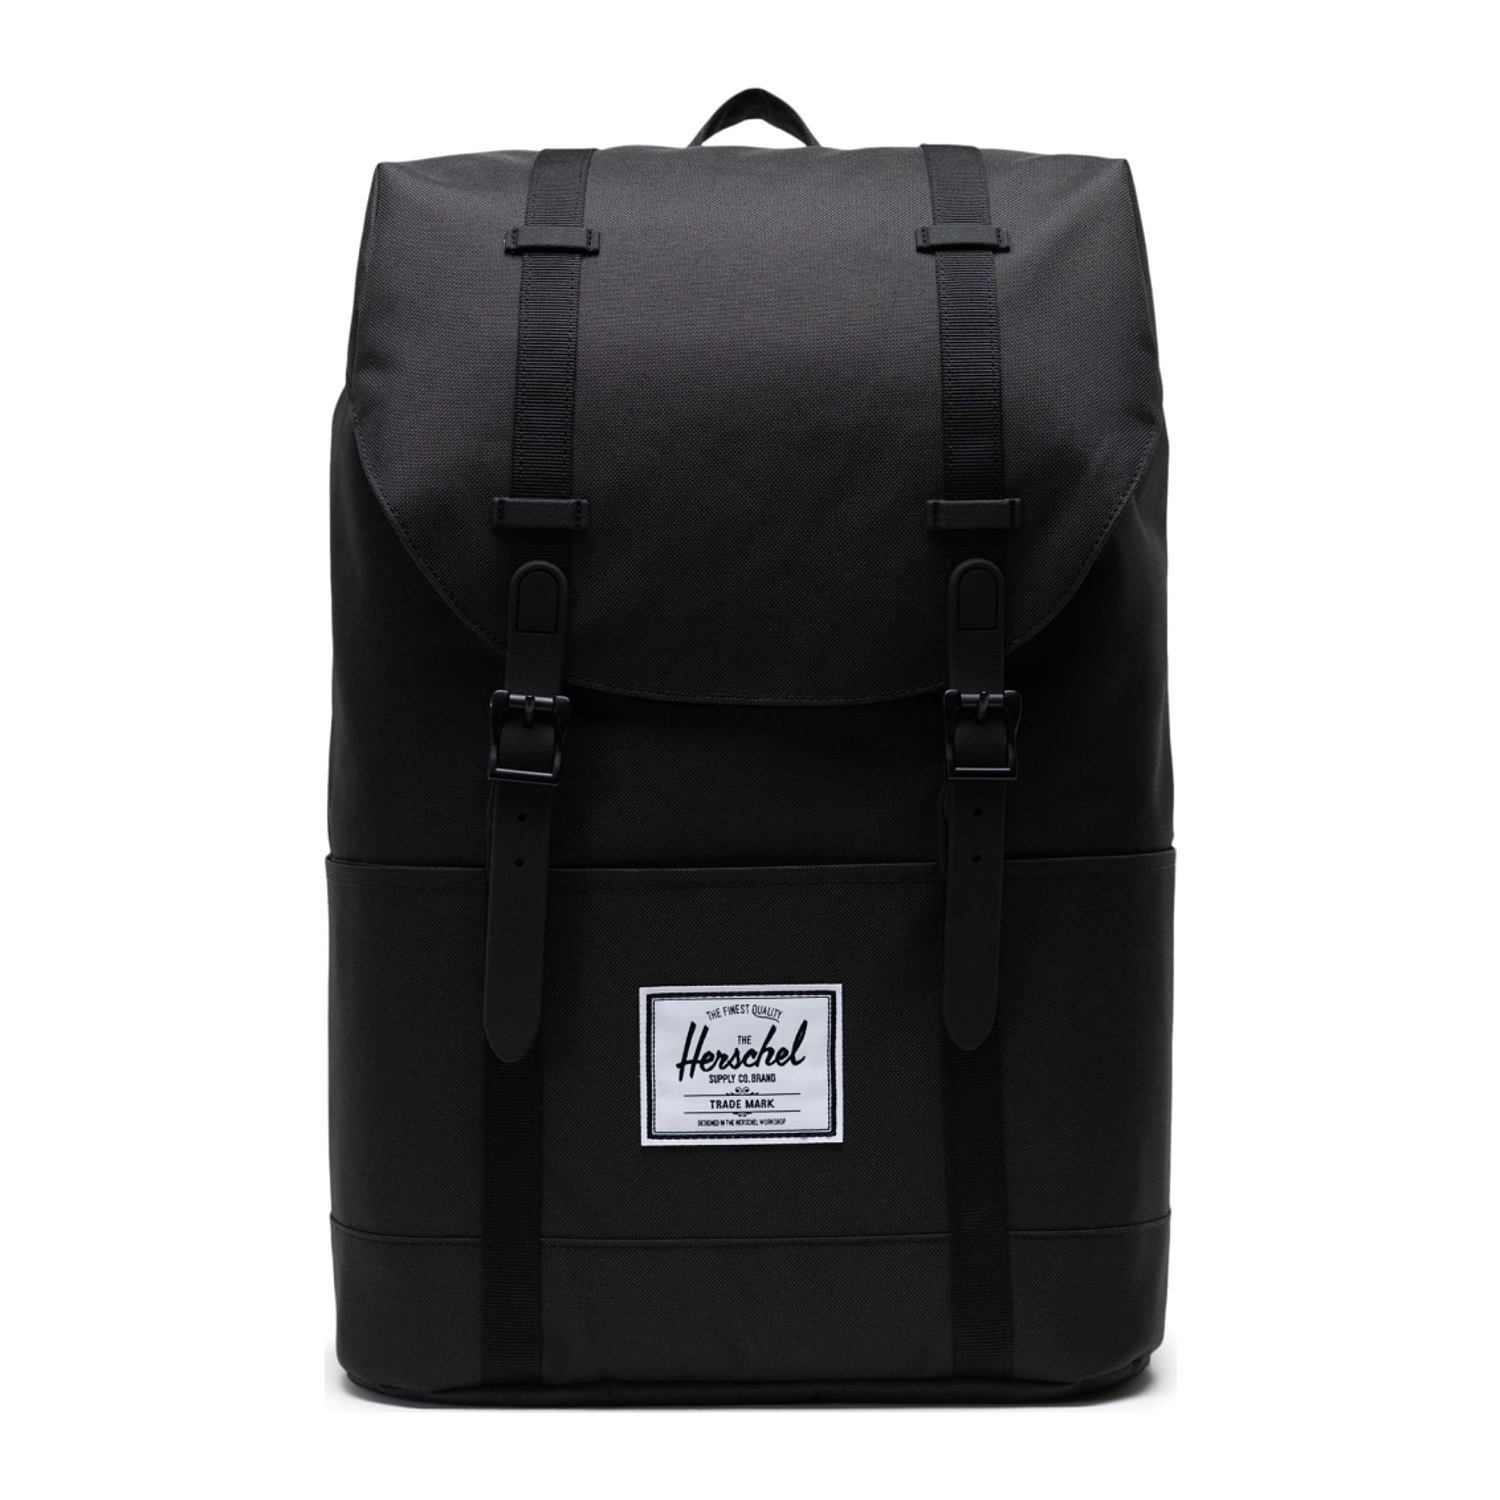 Herschel's Retreat brings classical simplicity to the laptop backpack